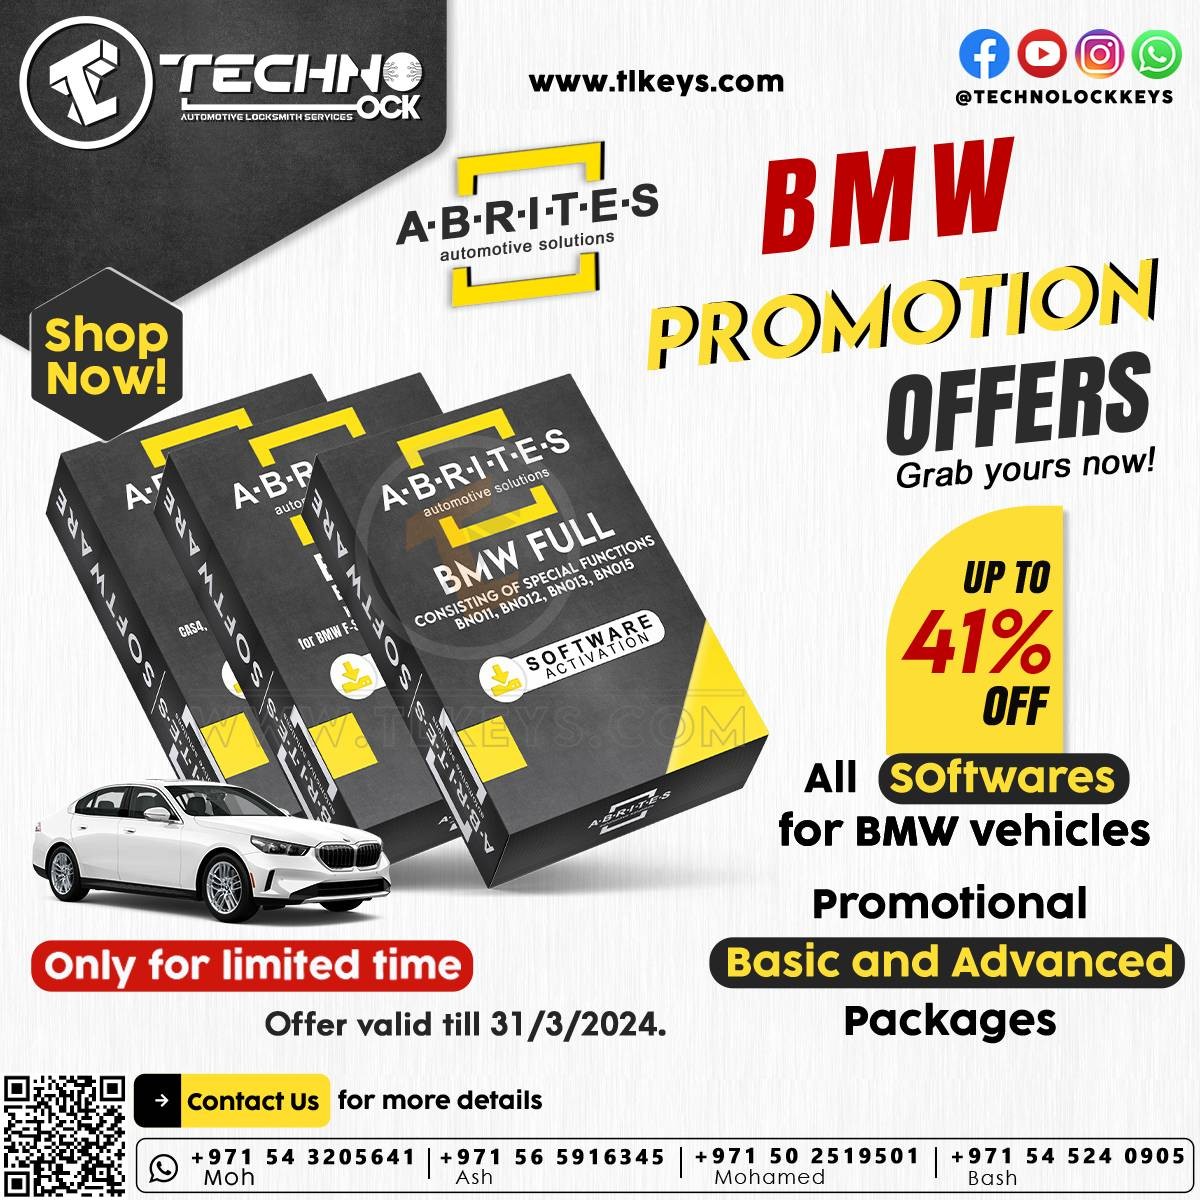 ABRITES offer 40% discount on licenses BN011, BN012, BN013, and BN015, in addition to a 40% discount on the BMW Full Pack